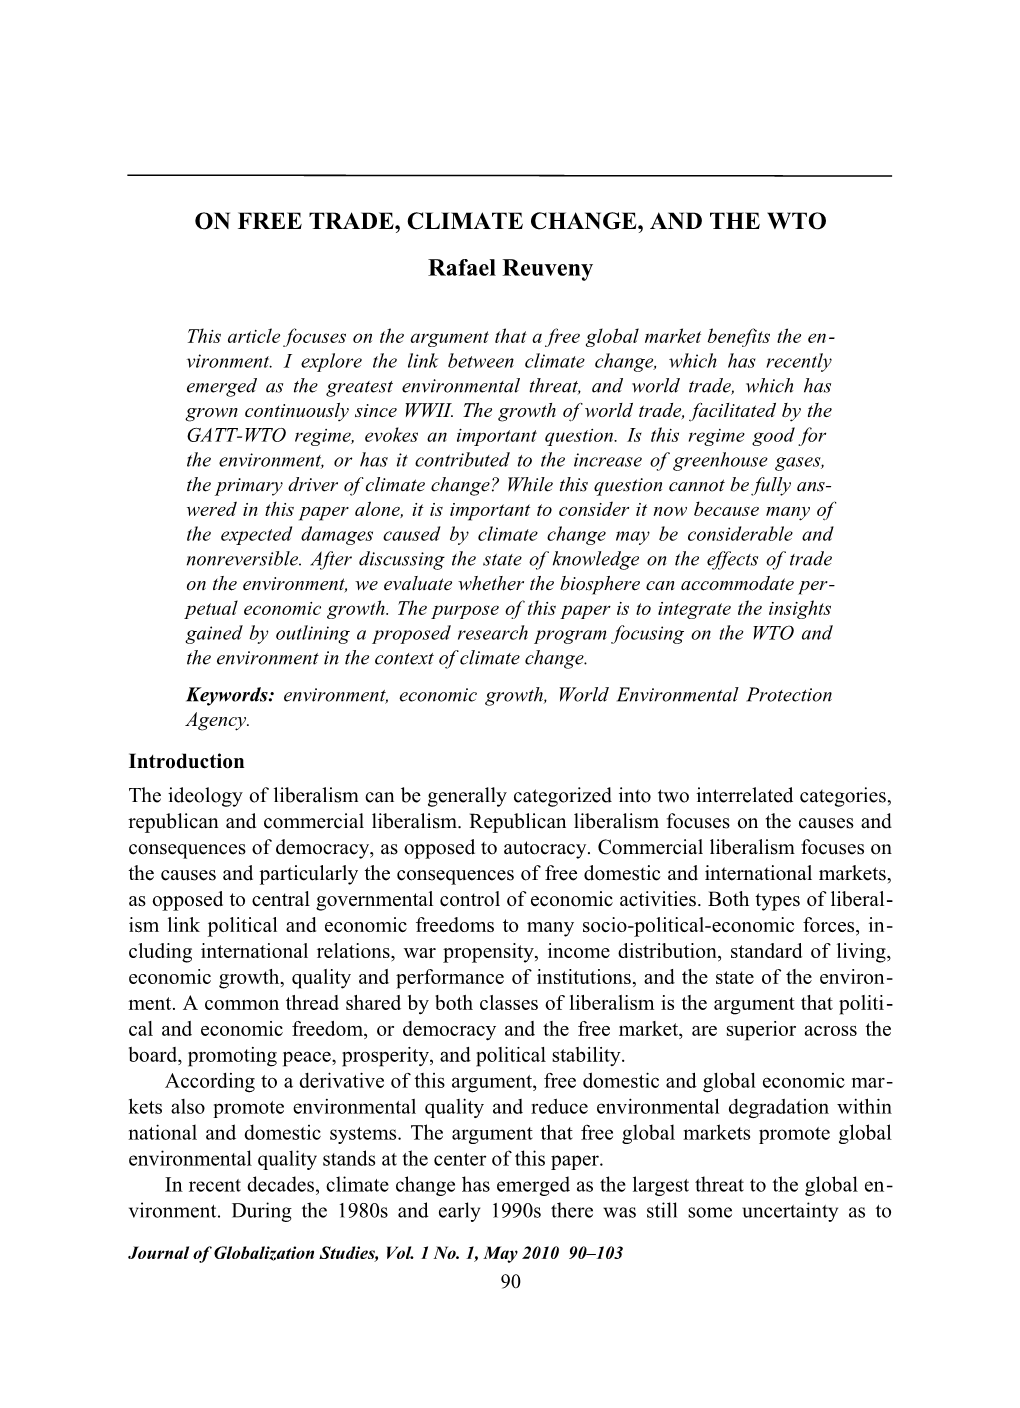 Reuveny on Free Trade, Climate Change, and the WTO